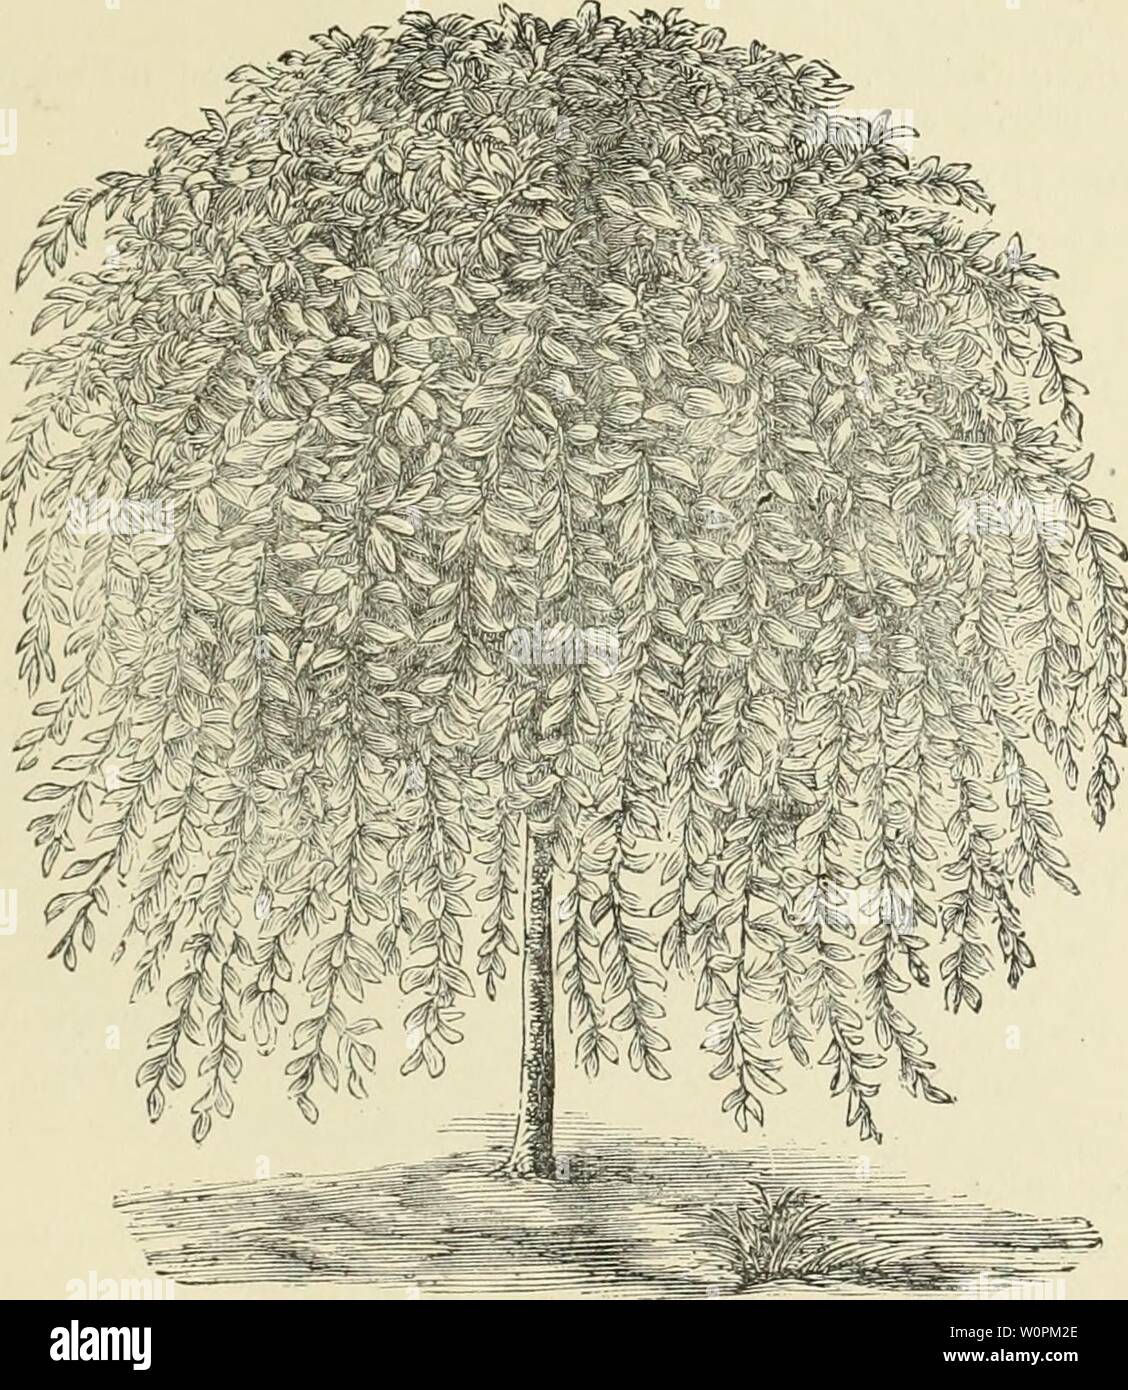 Archive image from page 82 of Descriptive catalogue of fruit and. Descriptive catalogue of fruit and ornamental trees, shrubs, vines, roses, etc. : cultivated and for sale descriptivecata1883nhal 0 Year: 1883  77    The Kilmarnock Weeping Willow. Stock Photo